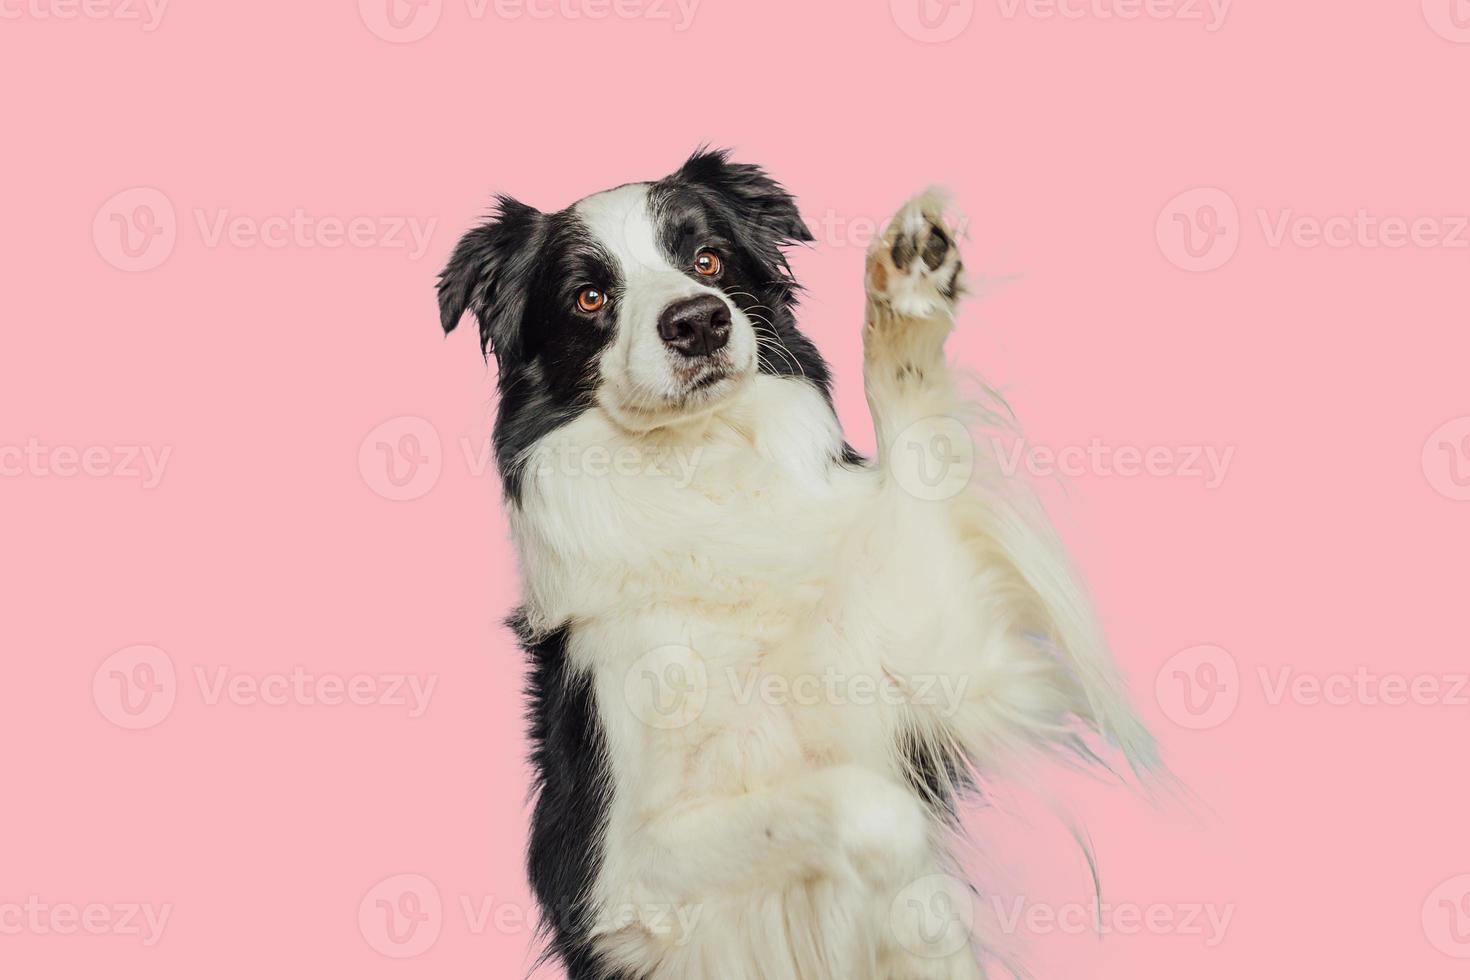 Cute puppy dog border collie with funny face waving paw isolated on pink background. Cute pet dog. Pet animal life concept. photo